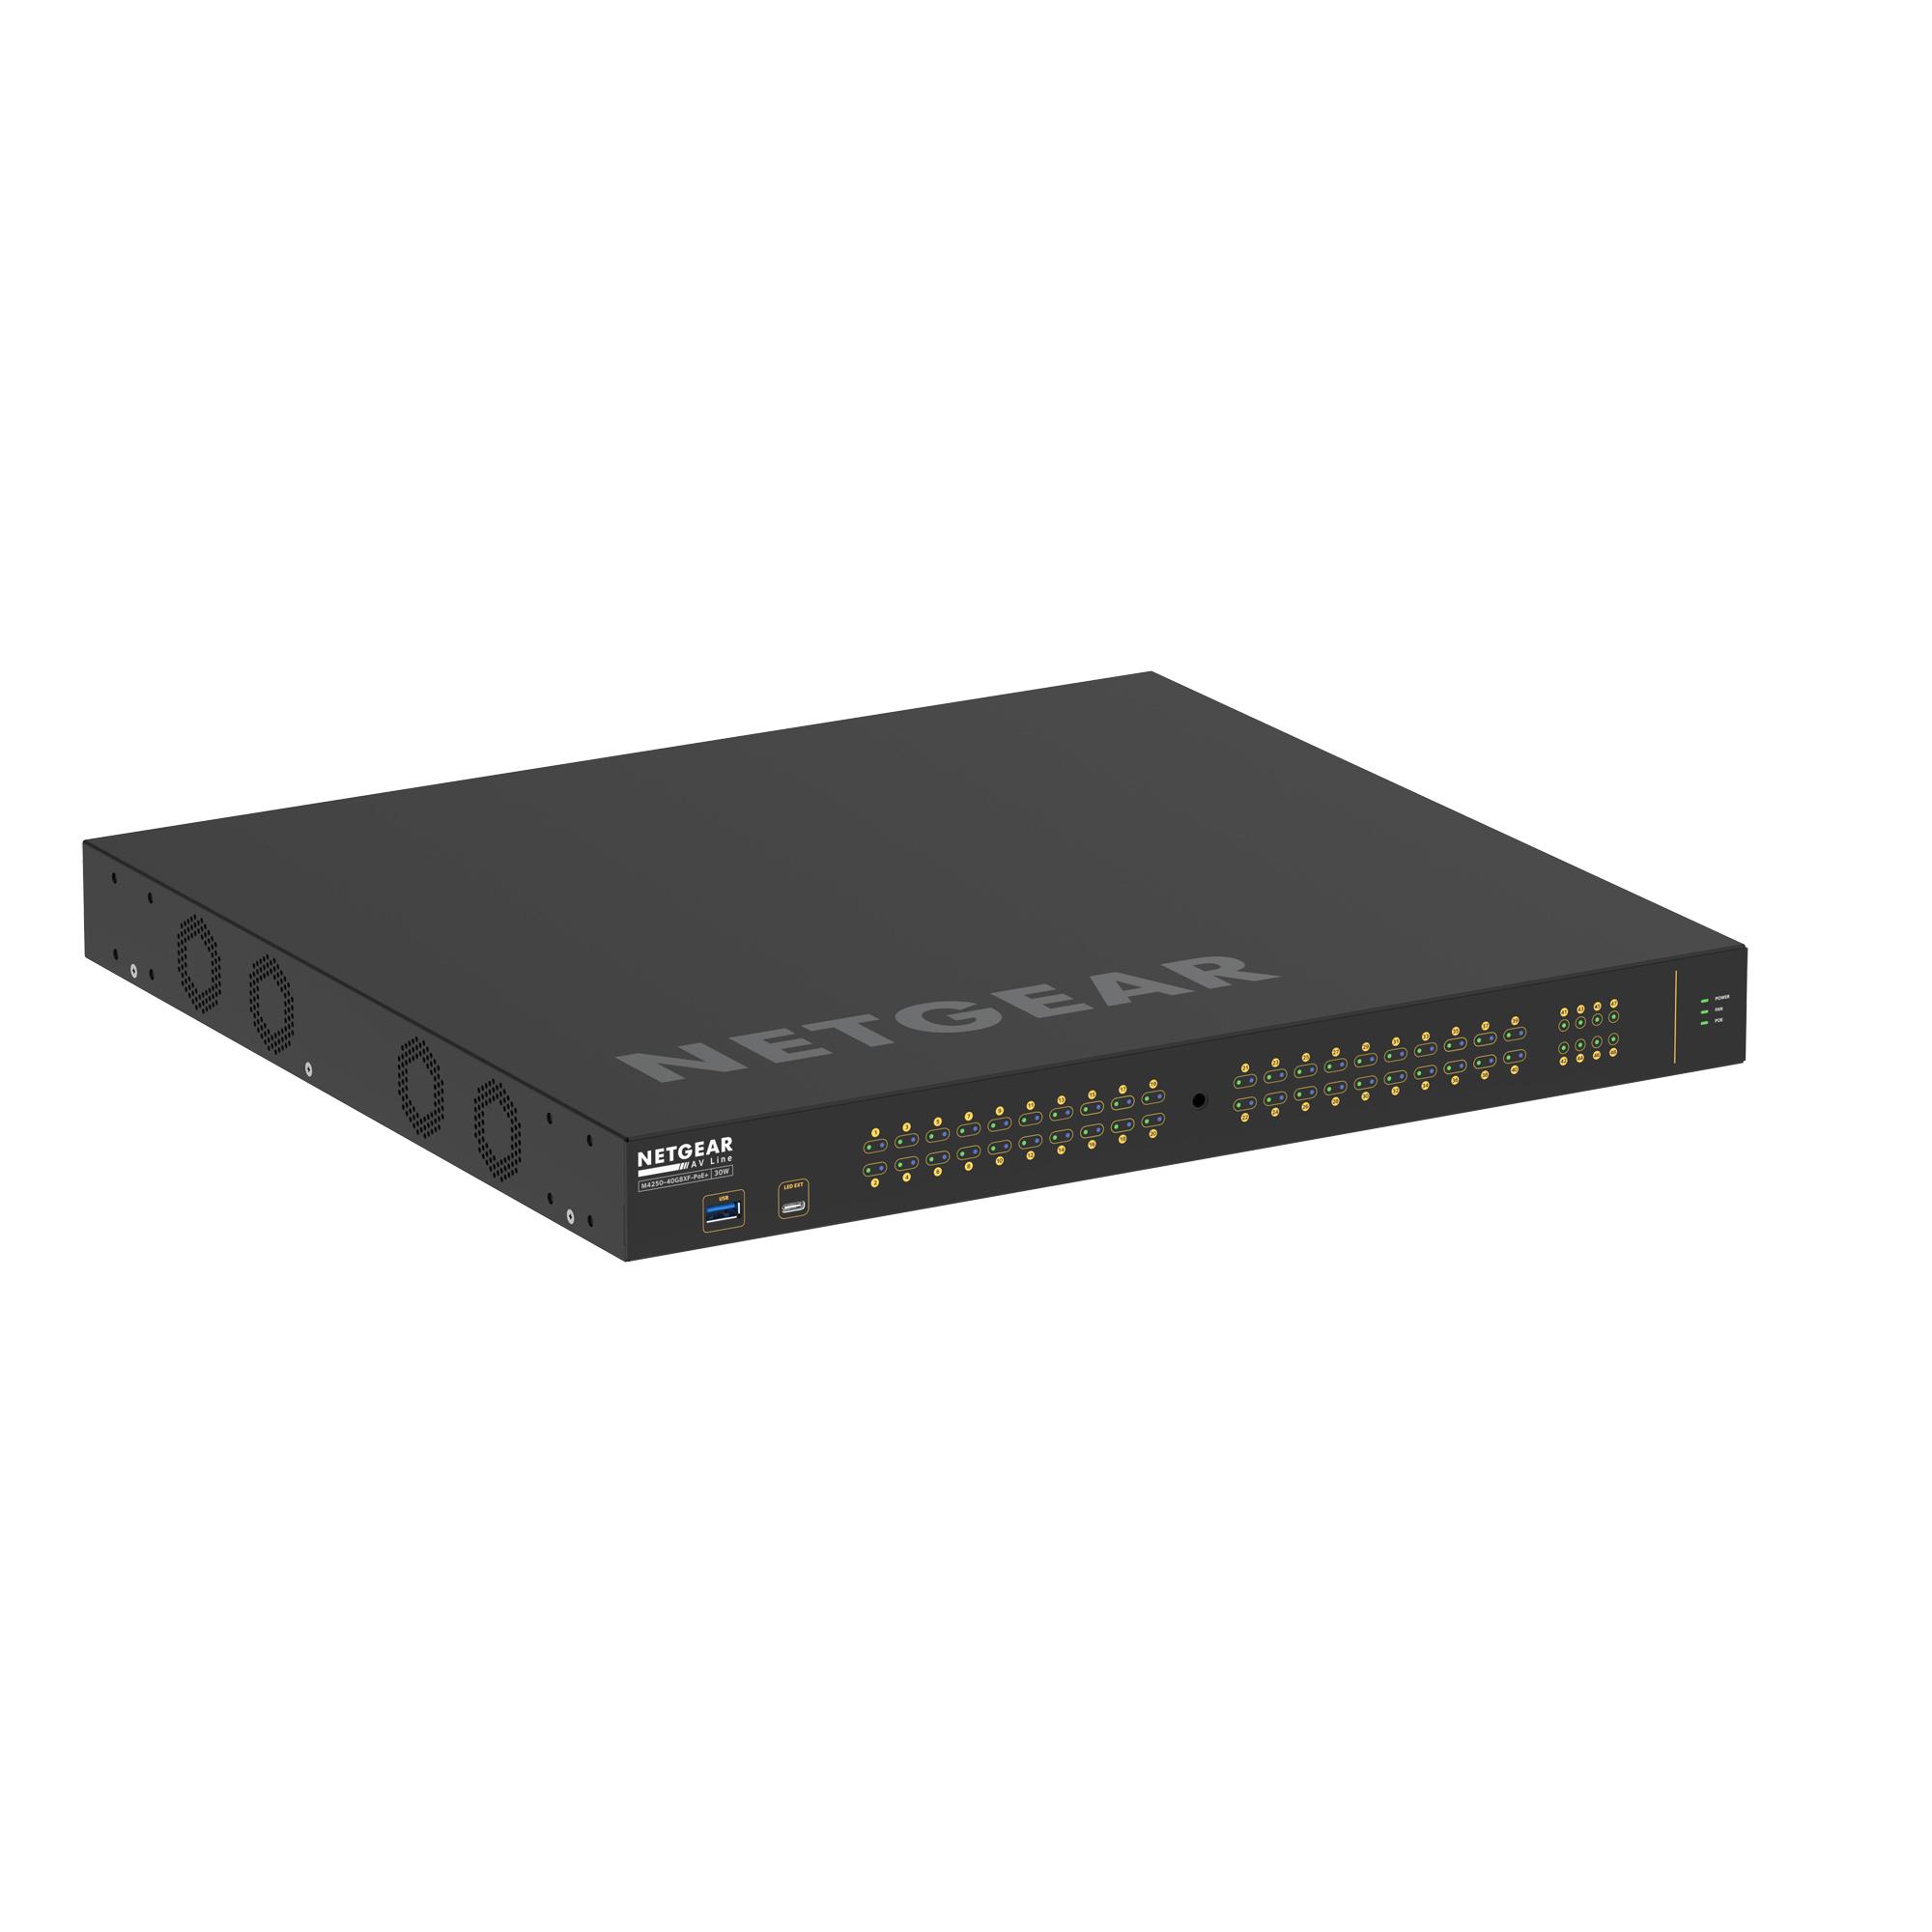 NG-M4250-40G8PXF 40x1G PoE+ 960W and 8xSFP+ Managed Switch